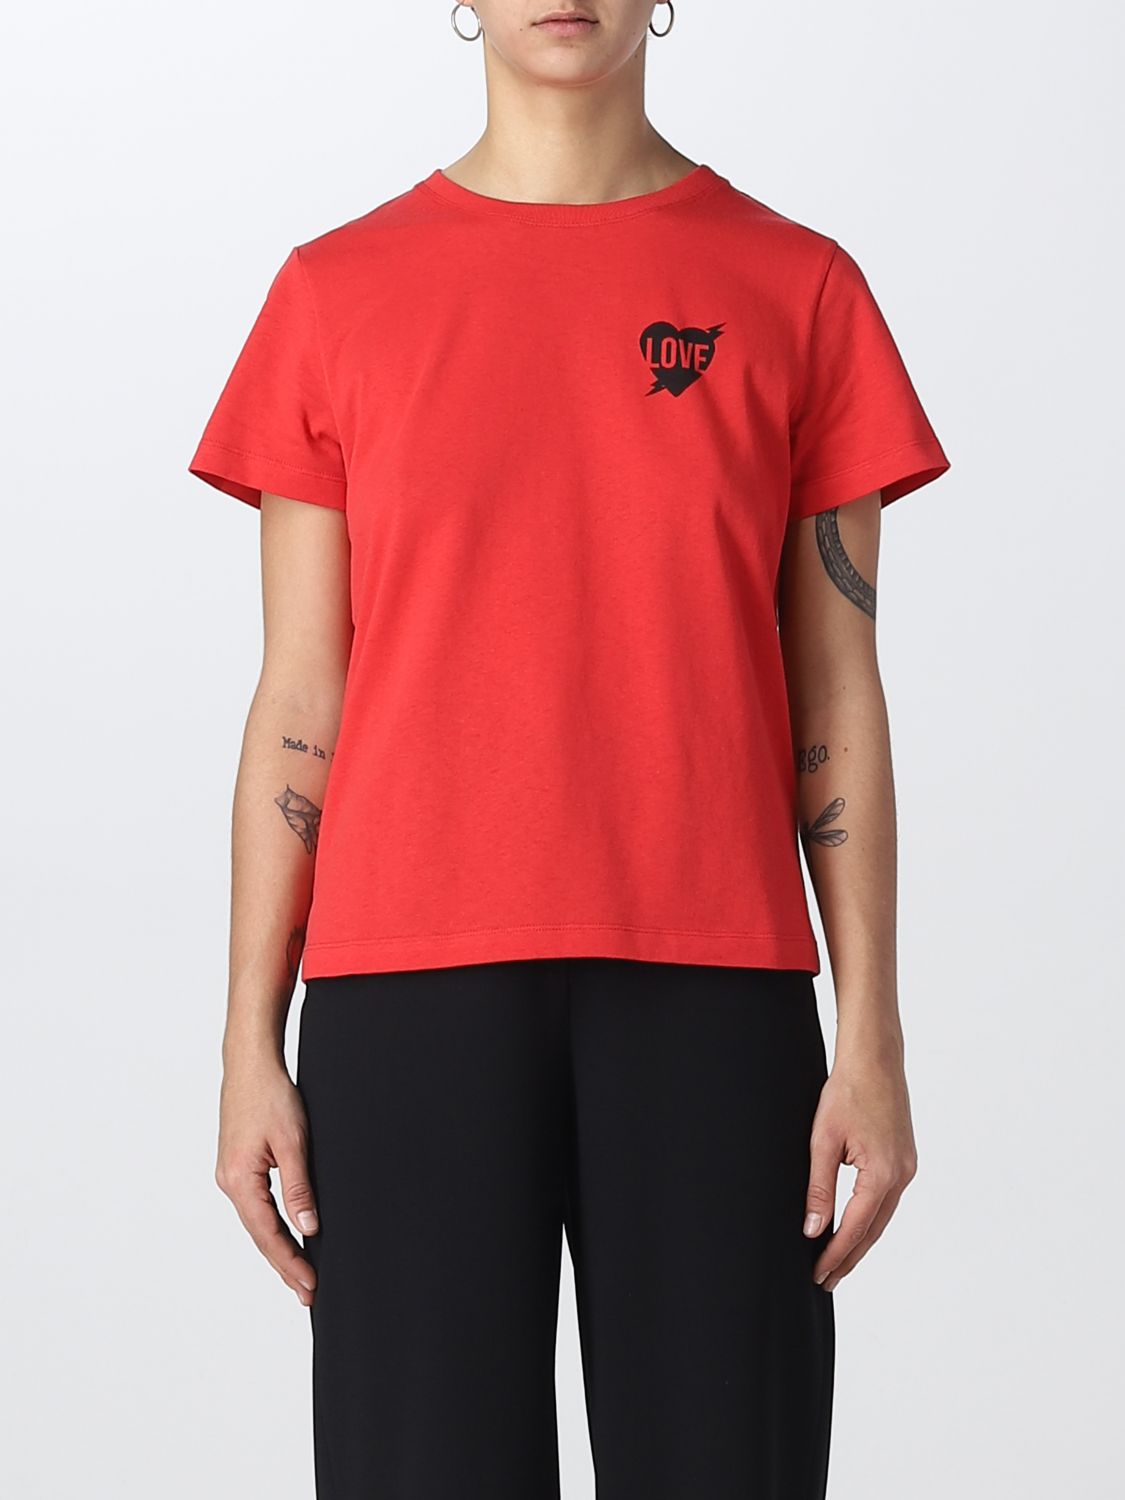 t-shirt red valentino woman colour red